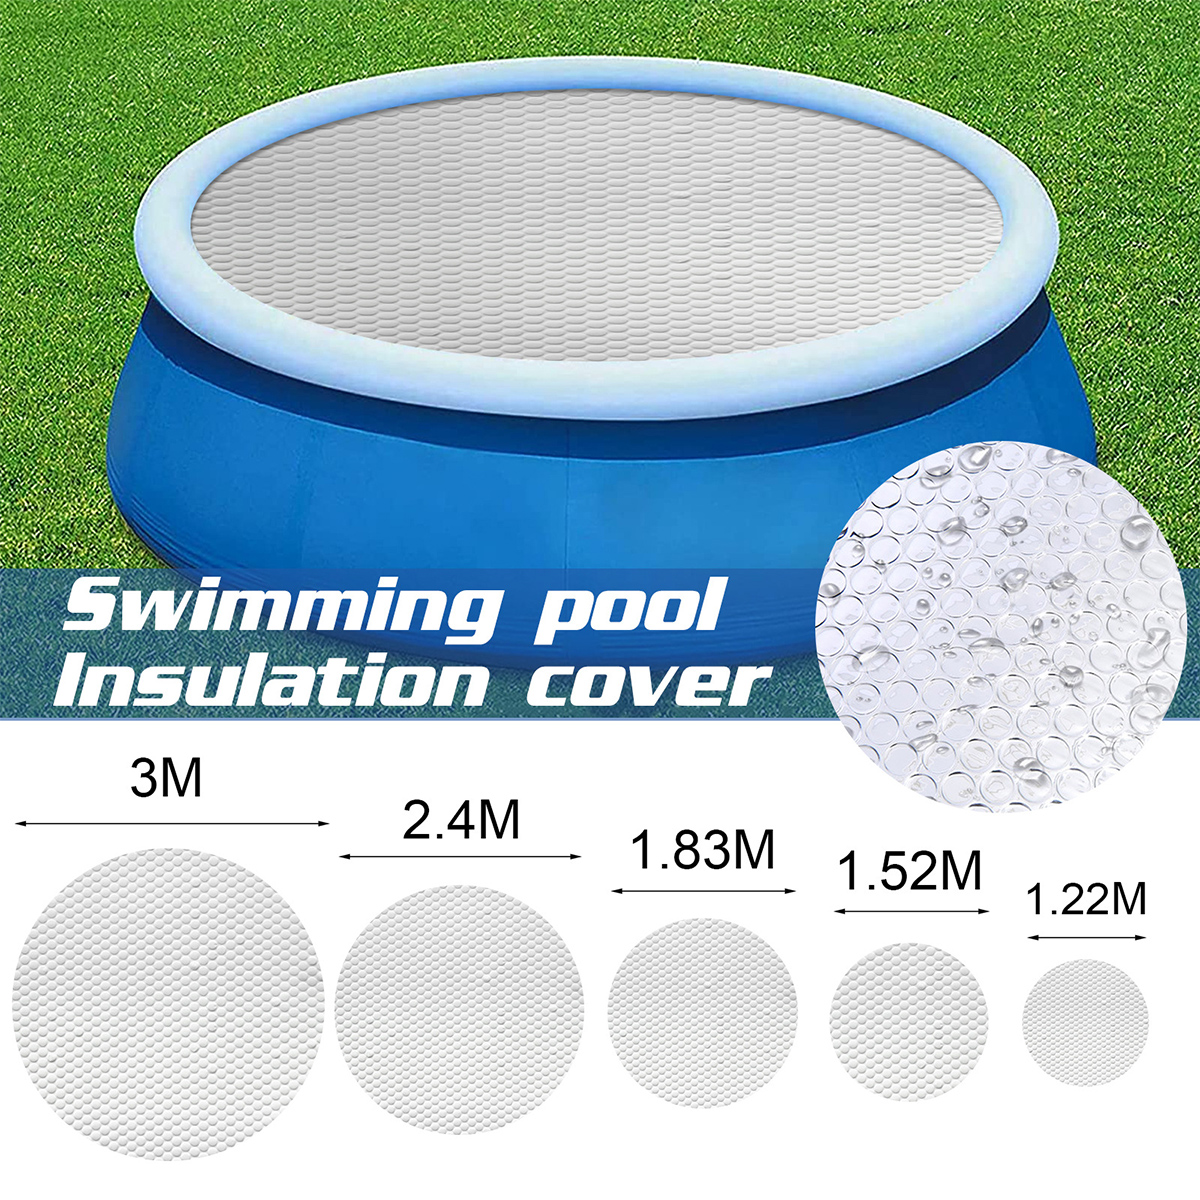 Round-PVC-Solar-Pool-Cover-Waterproof-Sun-Protection-Swimming-Pool-Insulation-Cover-Sheet-1877580-1